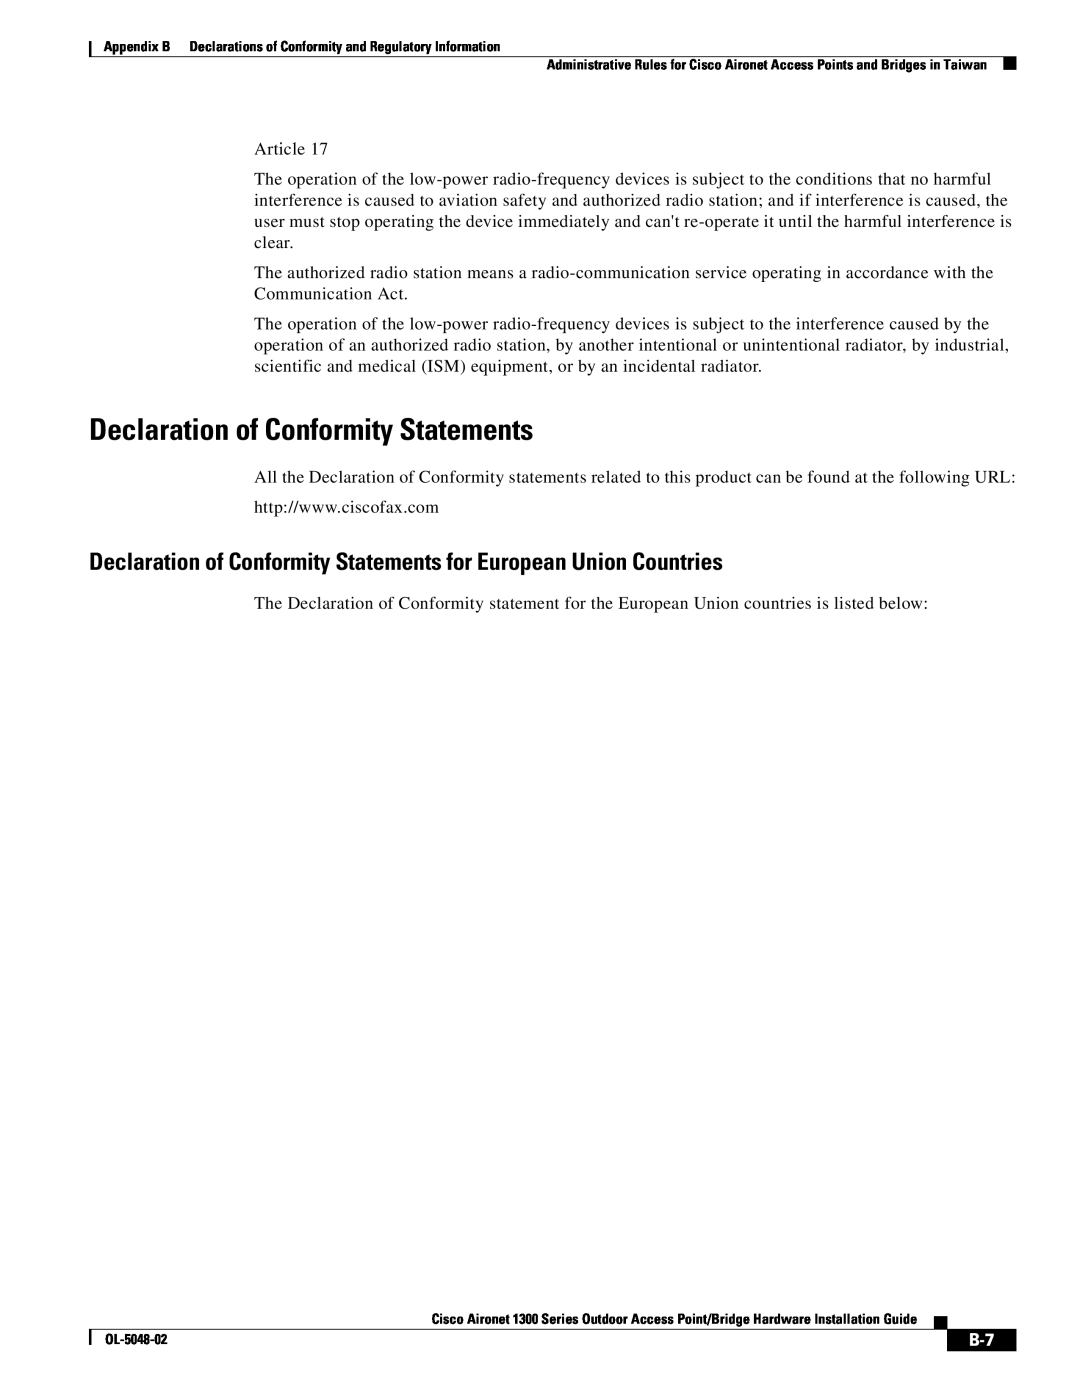 Cisco Systems 1300 Series manual Declaration of Conformity Statements 